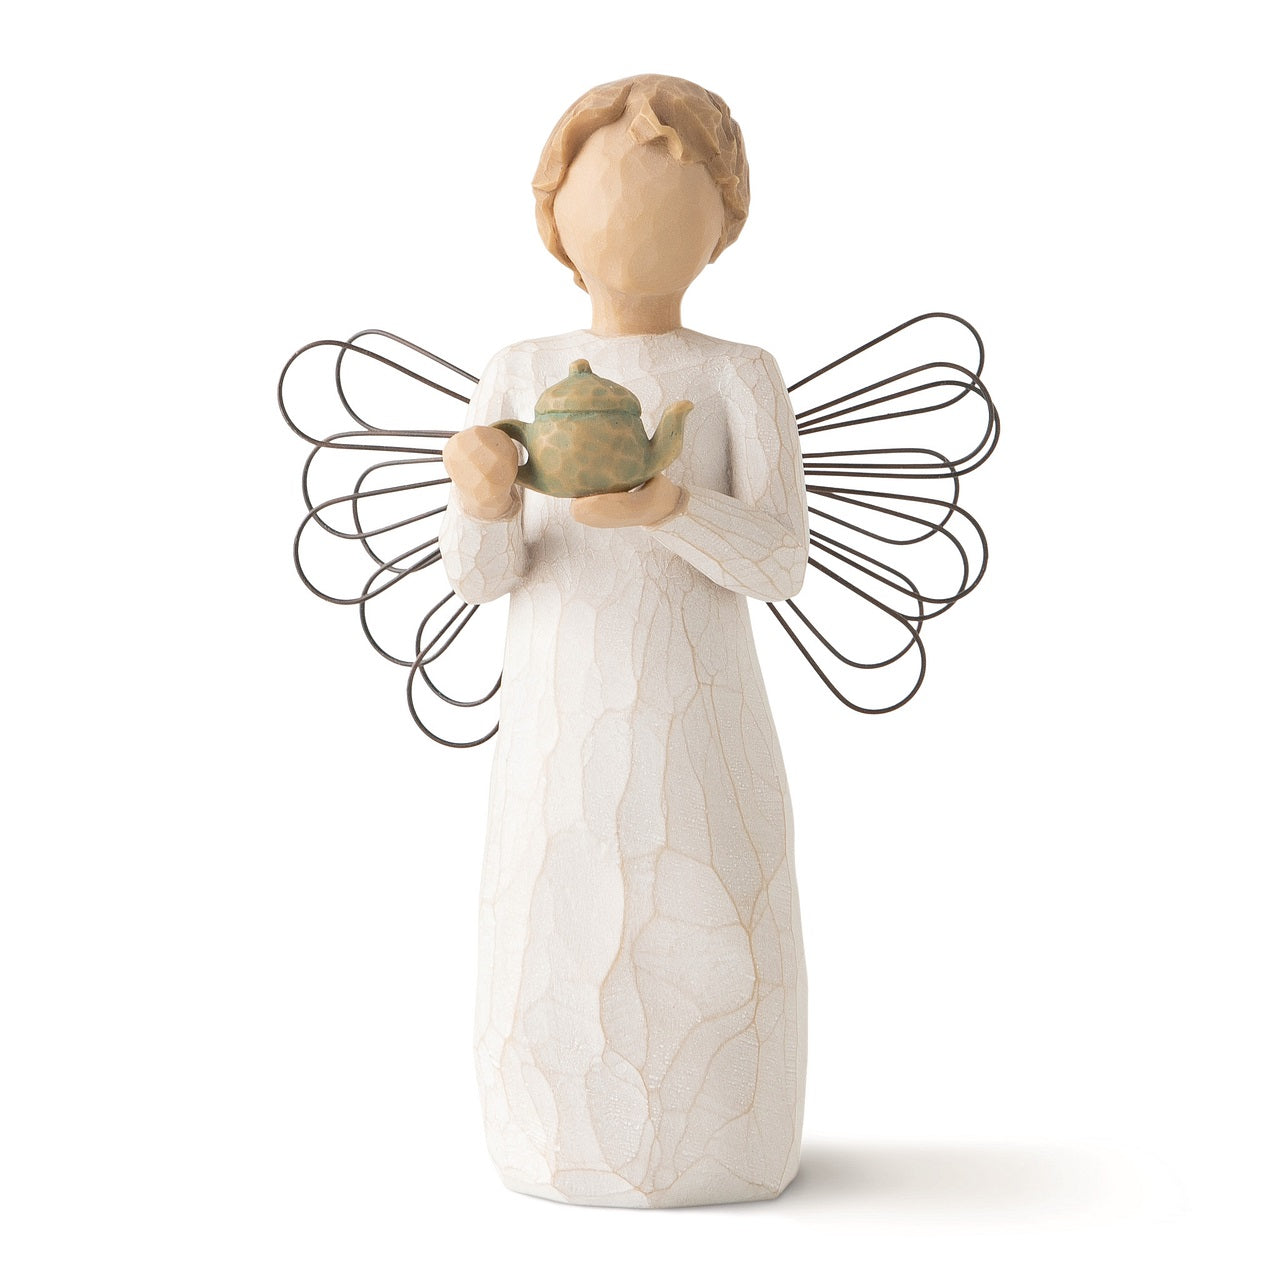 Willow Tree Angel of the Kitchen  Willow Tree is an intimate line of figurative sculptures representing sentiments of love, closeness, healing, courage, hope...all the emotions we encounter in life. Artist Susan Lordi hand carves the original of each Willow Tree sculpture.